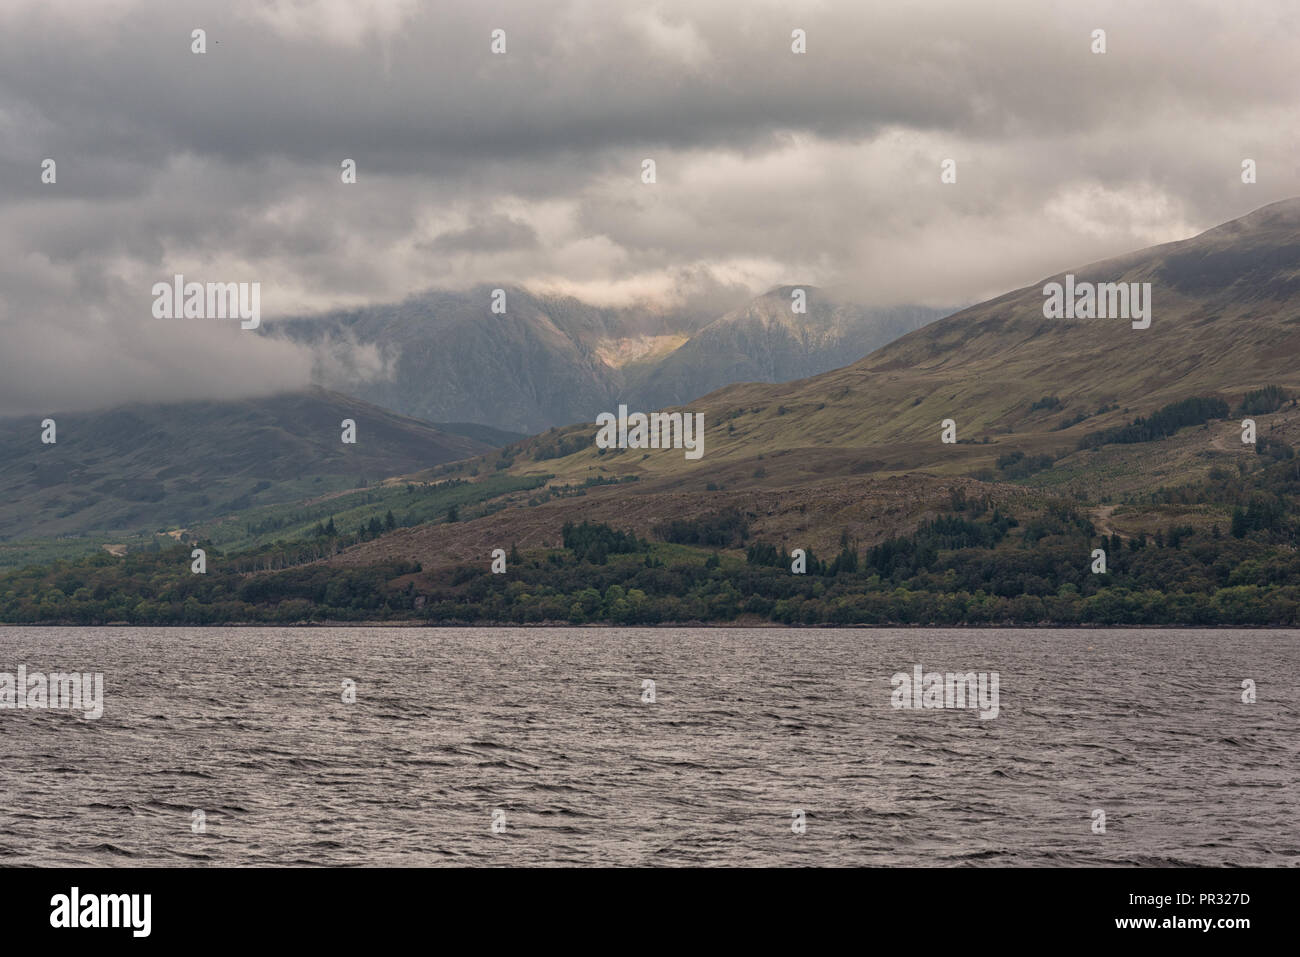 Fort William and Loch Linnhe views of water and mountains in Scotland Stock Photo